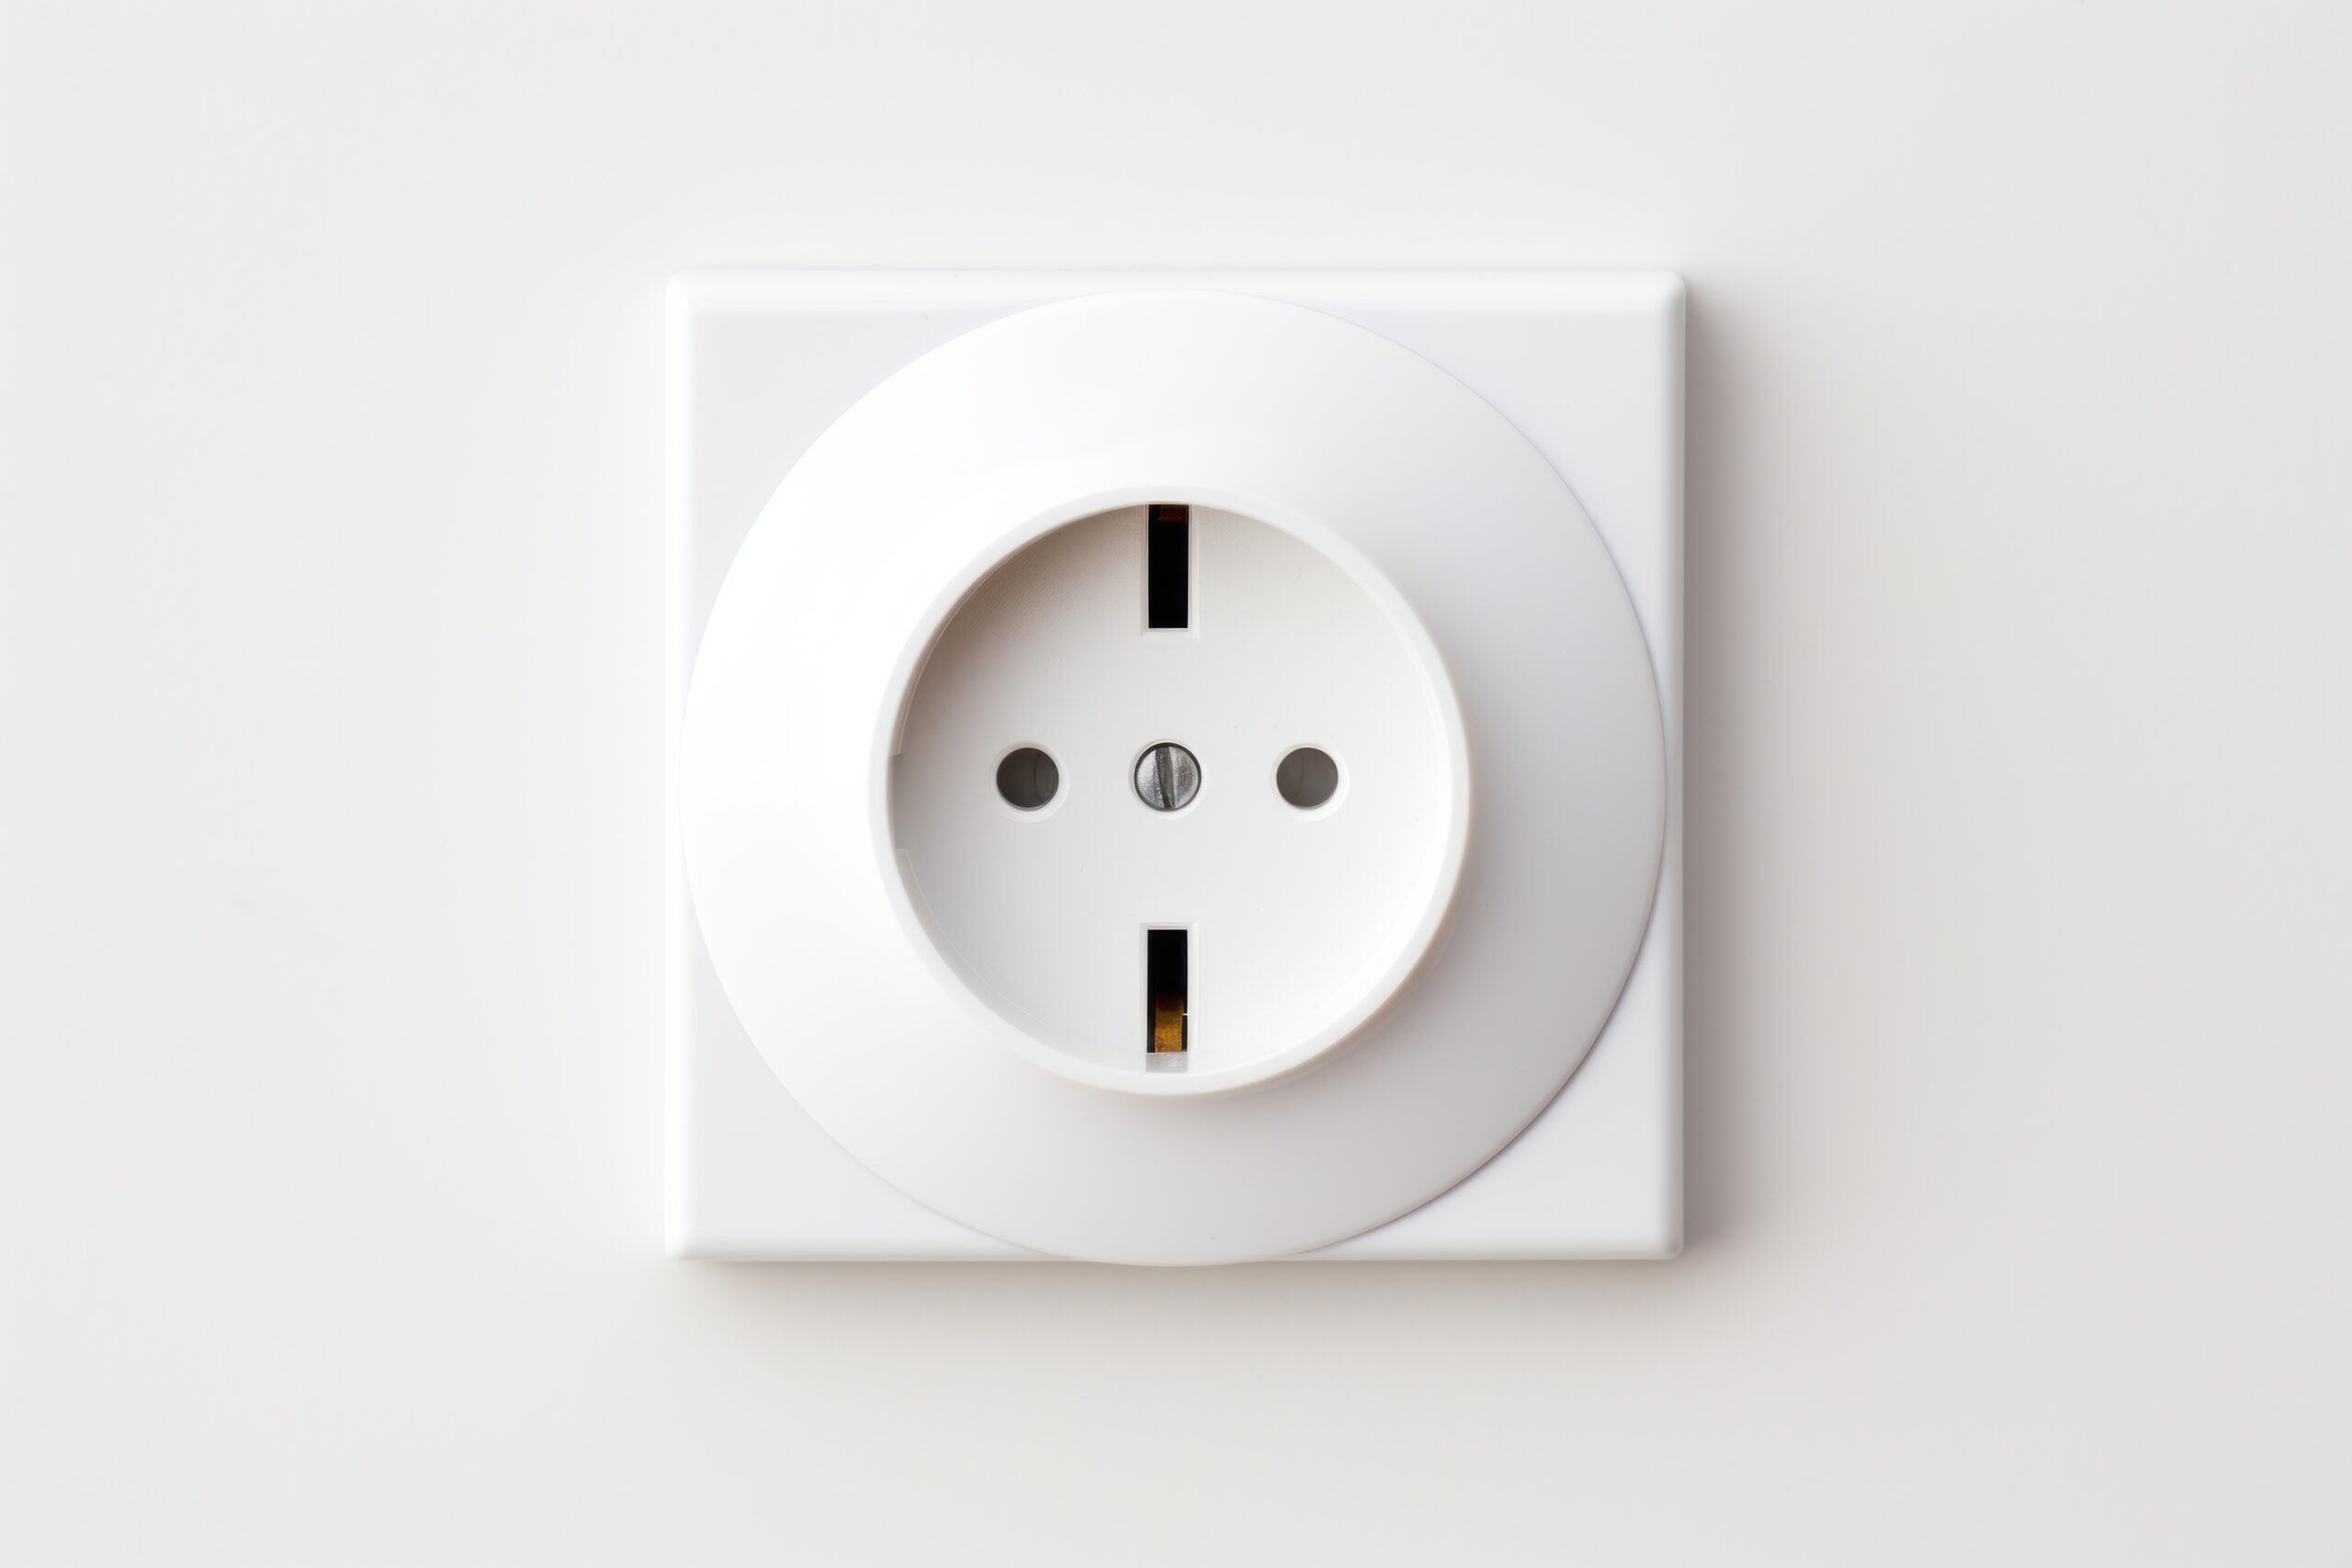 www.appr.com : How To Connect Smart Plug To Wifi?